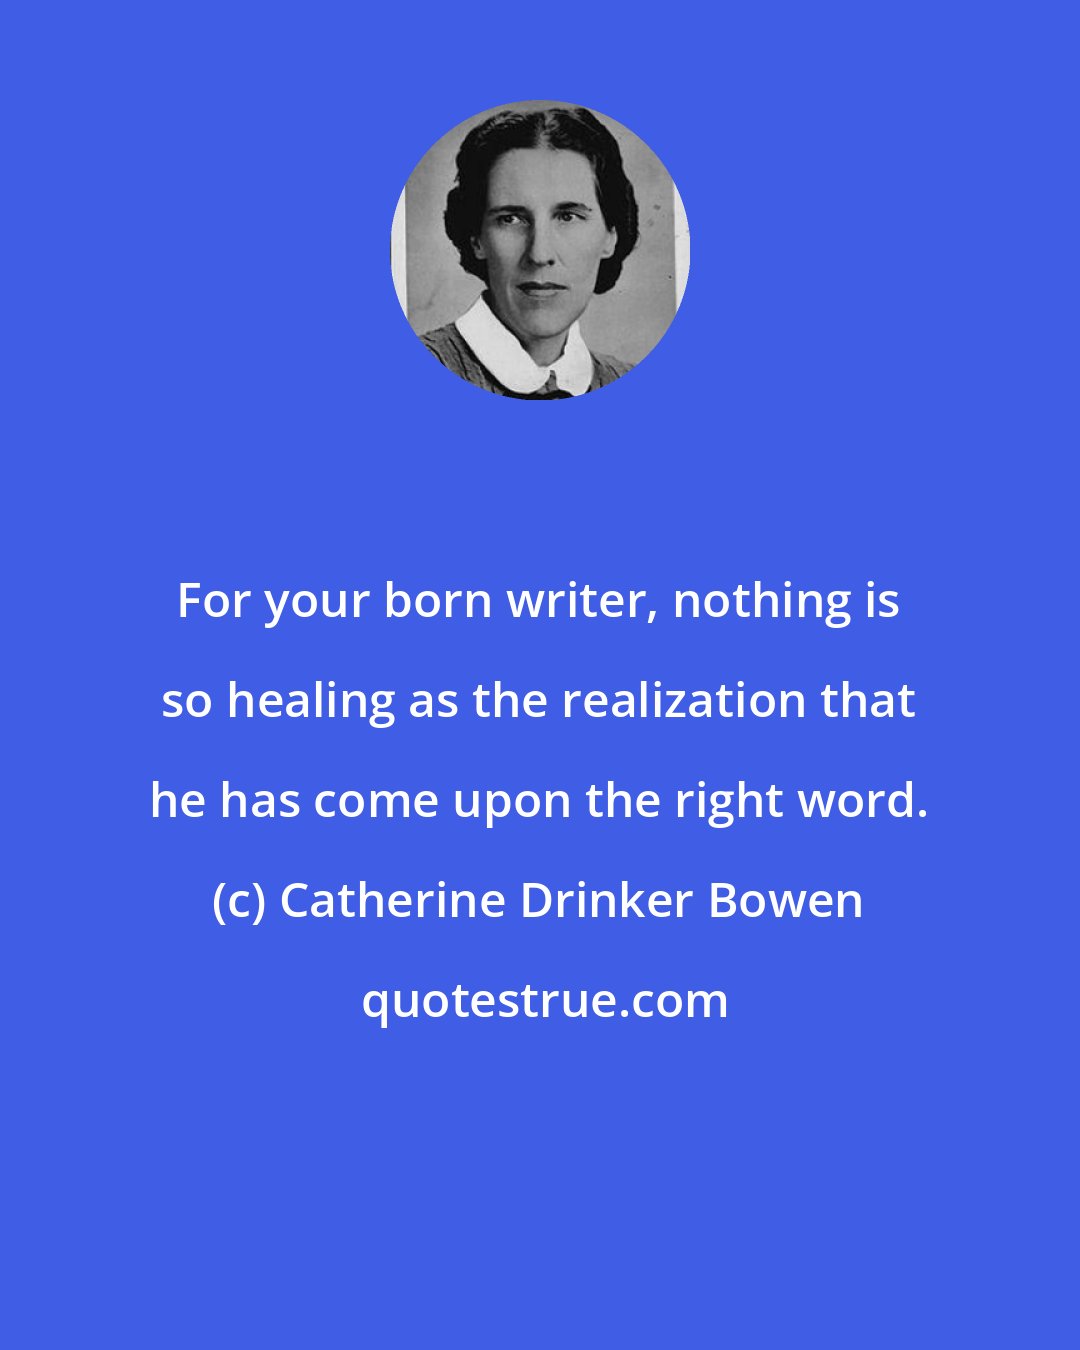 Catherine Drinker Bowen: For your born writer, nothing is so healing as the realization that he has come upon the right word.